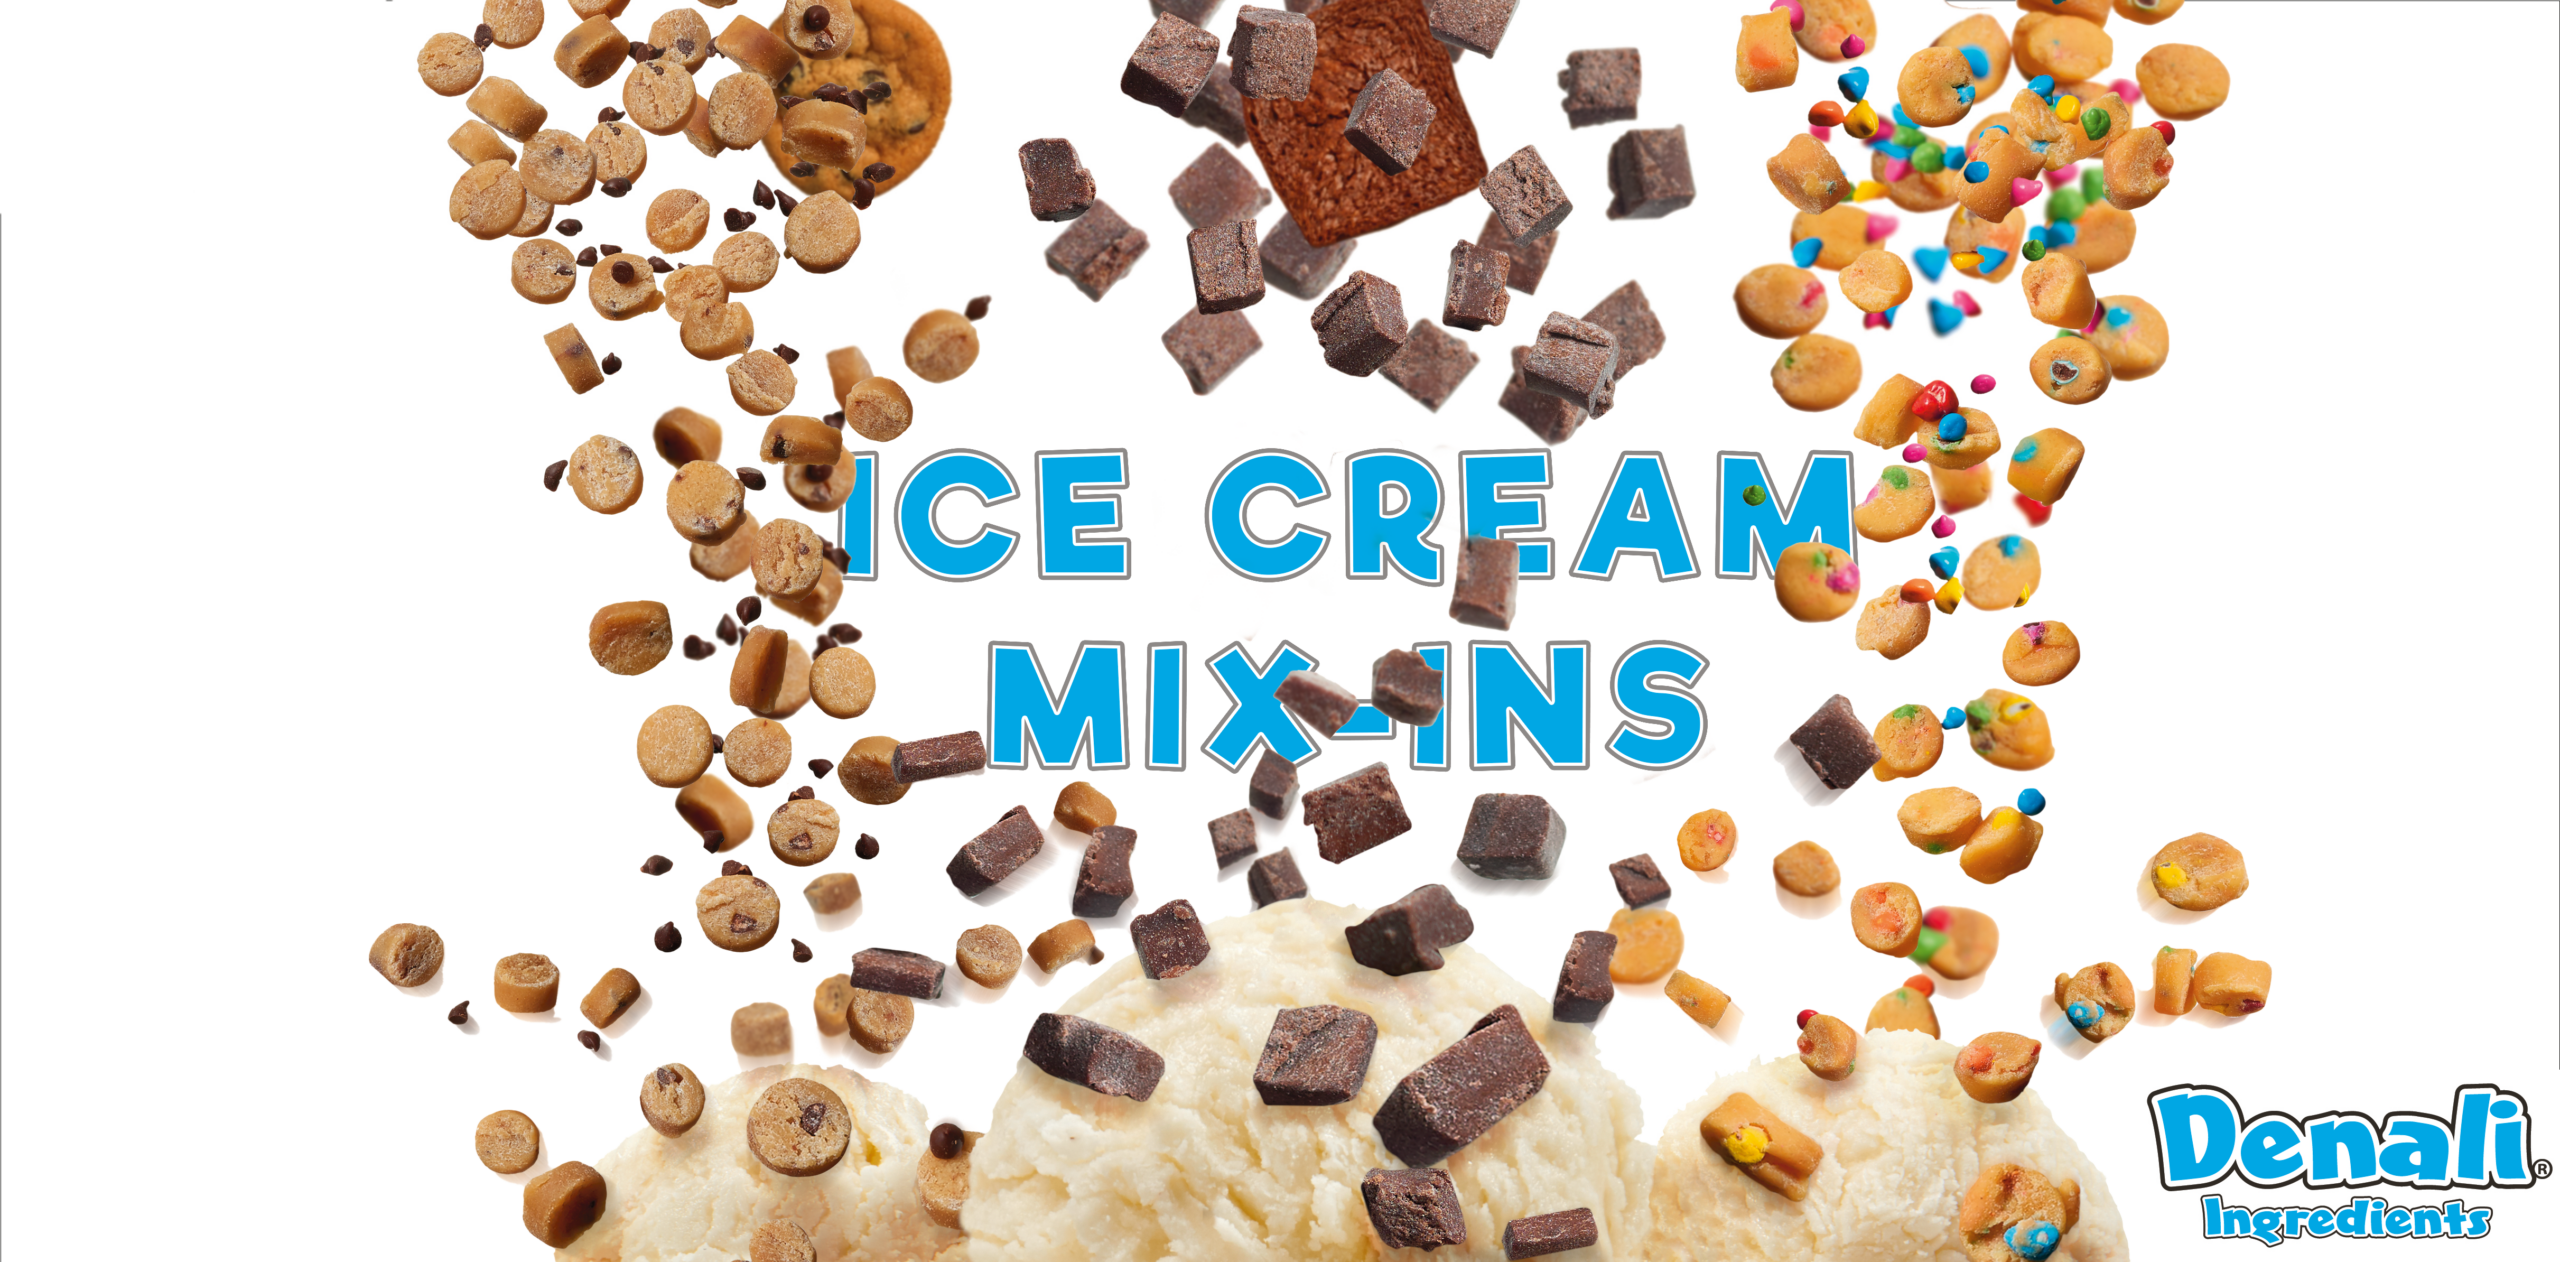 Ice cream mix-ins with text behind it